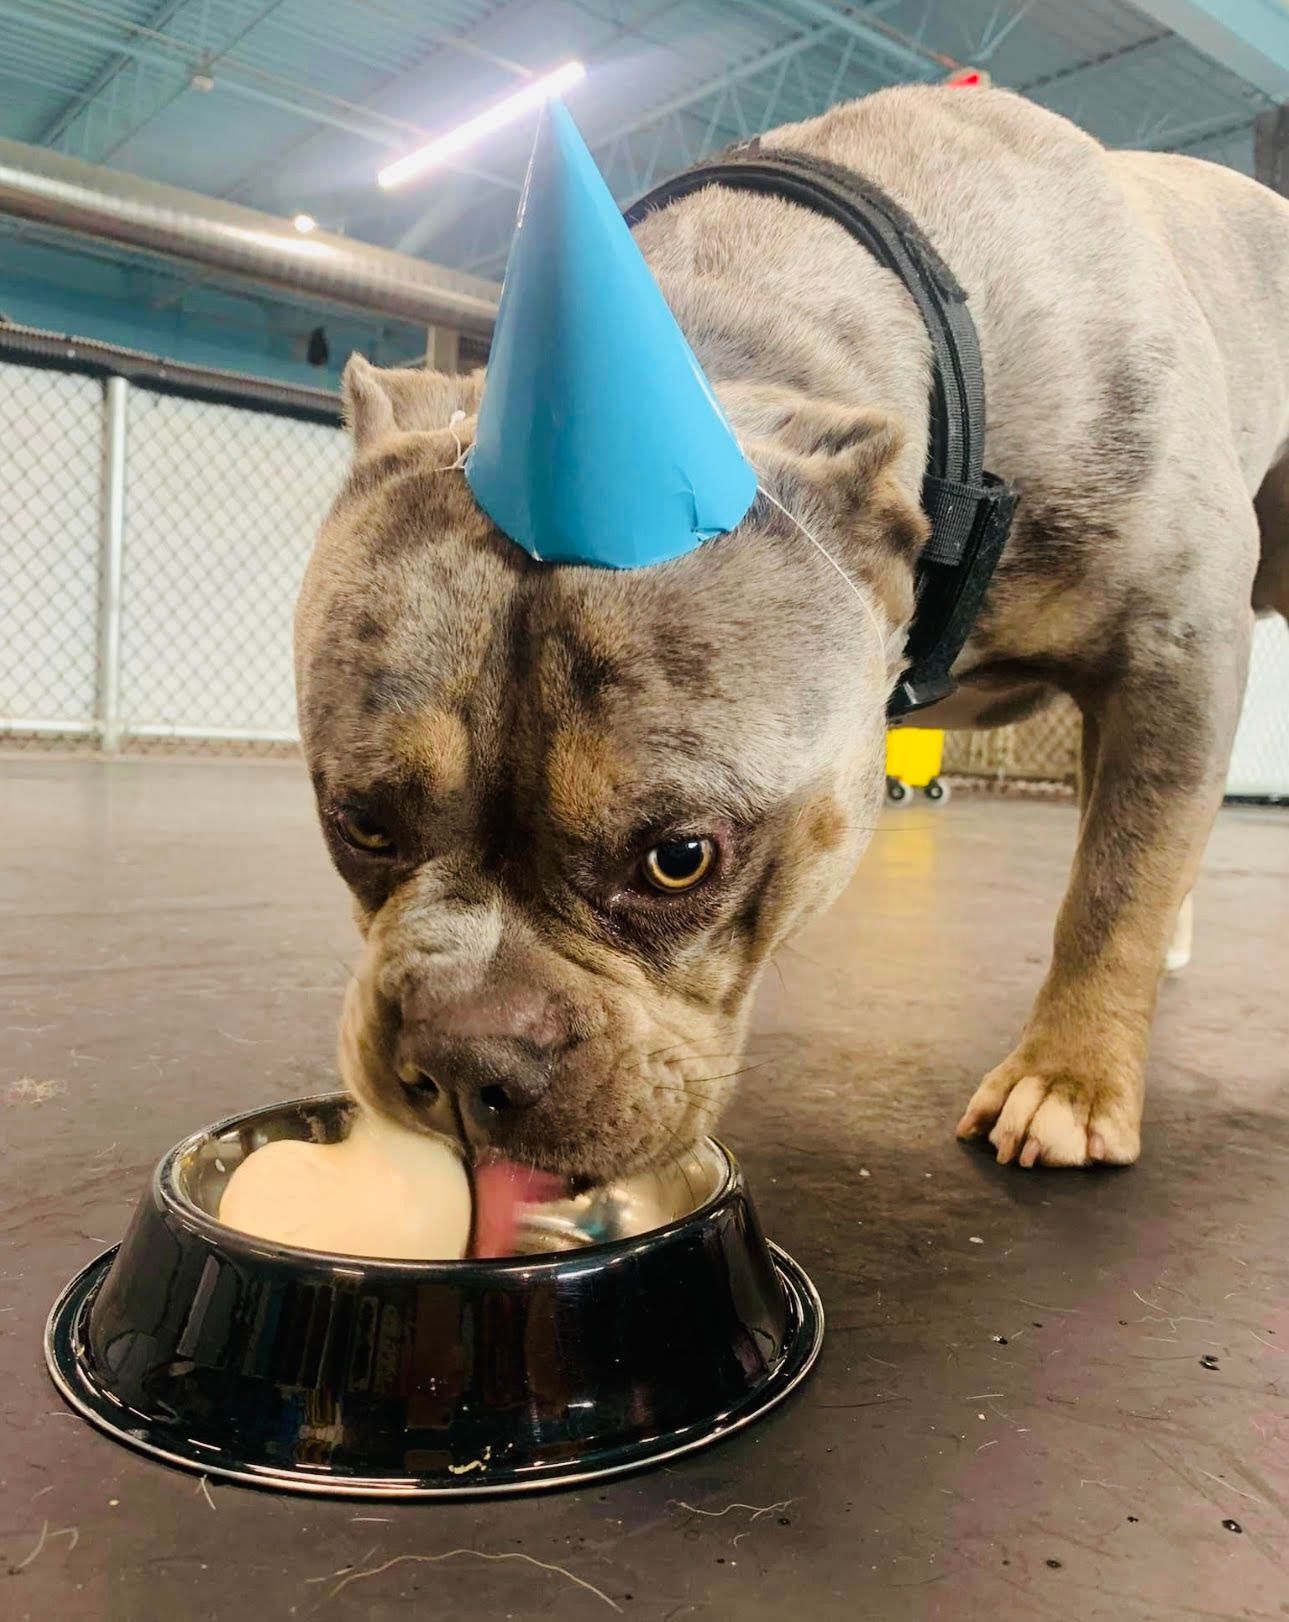 dog with a birthday hat eating ice cream